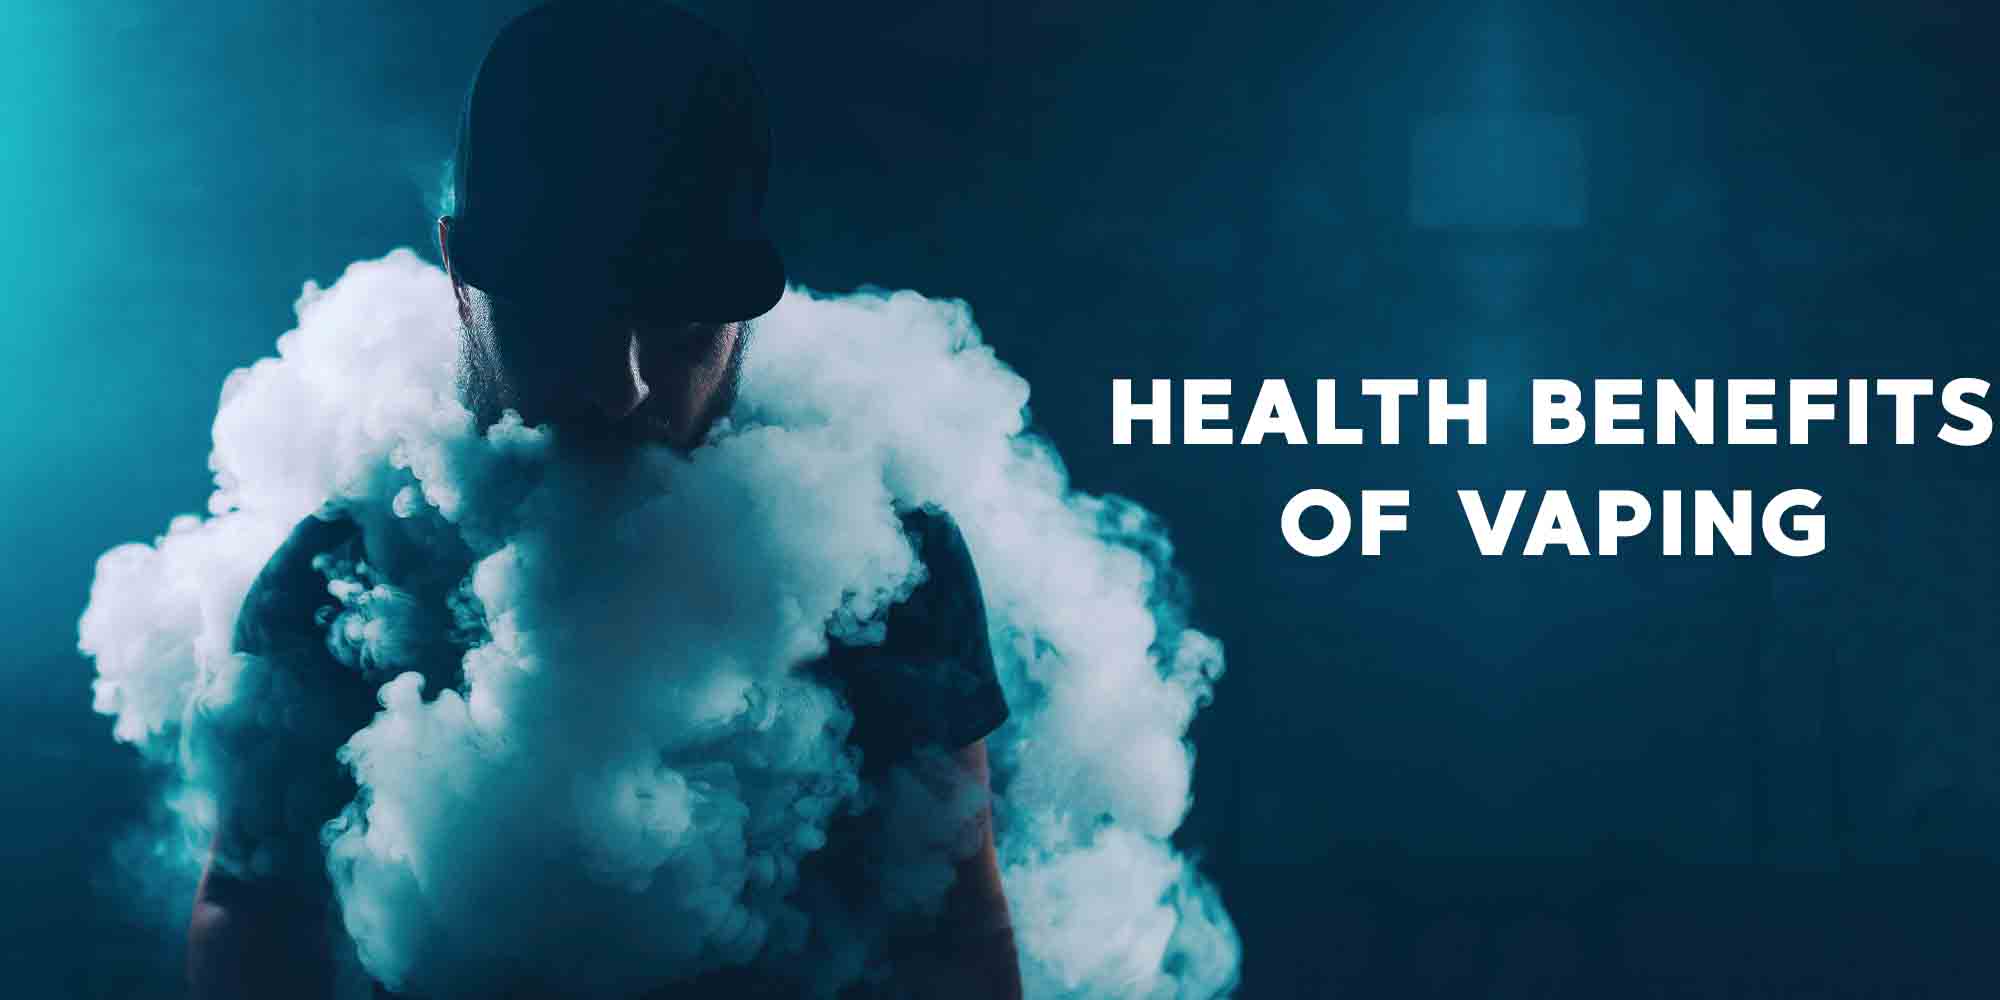 How Does Vaping Benefit Health?